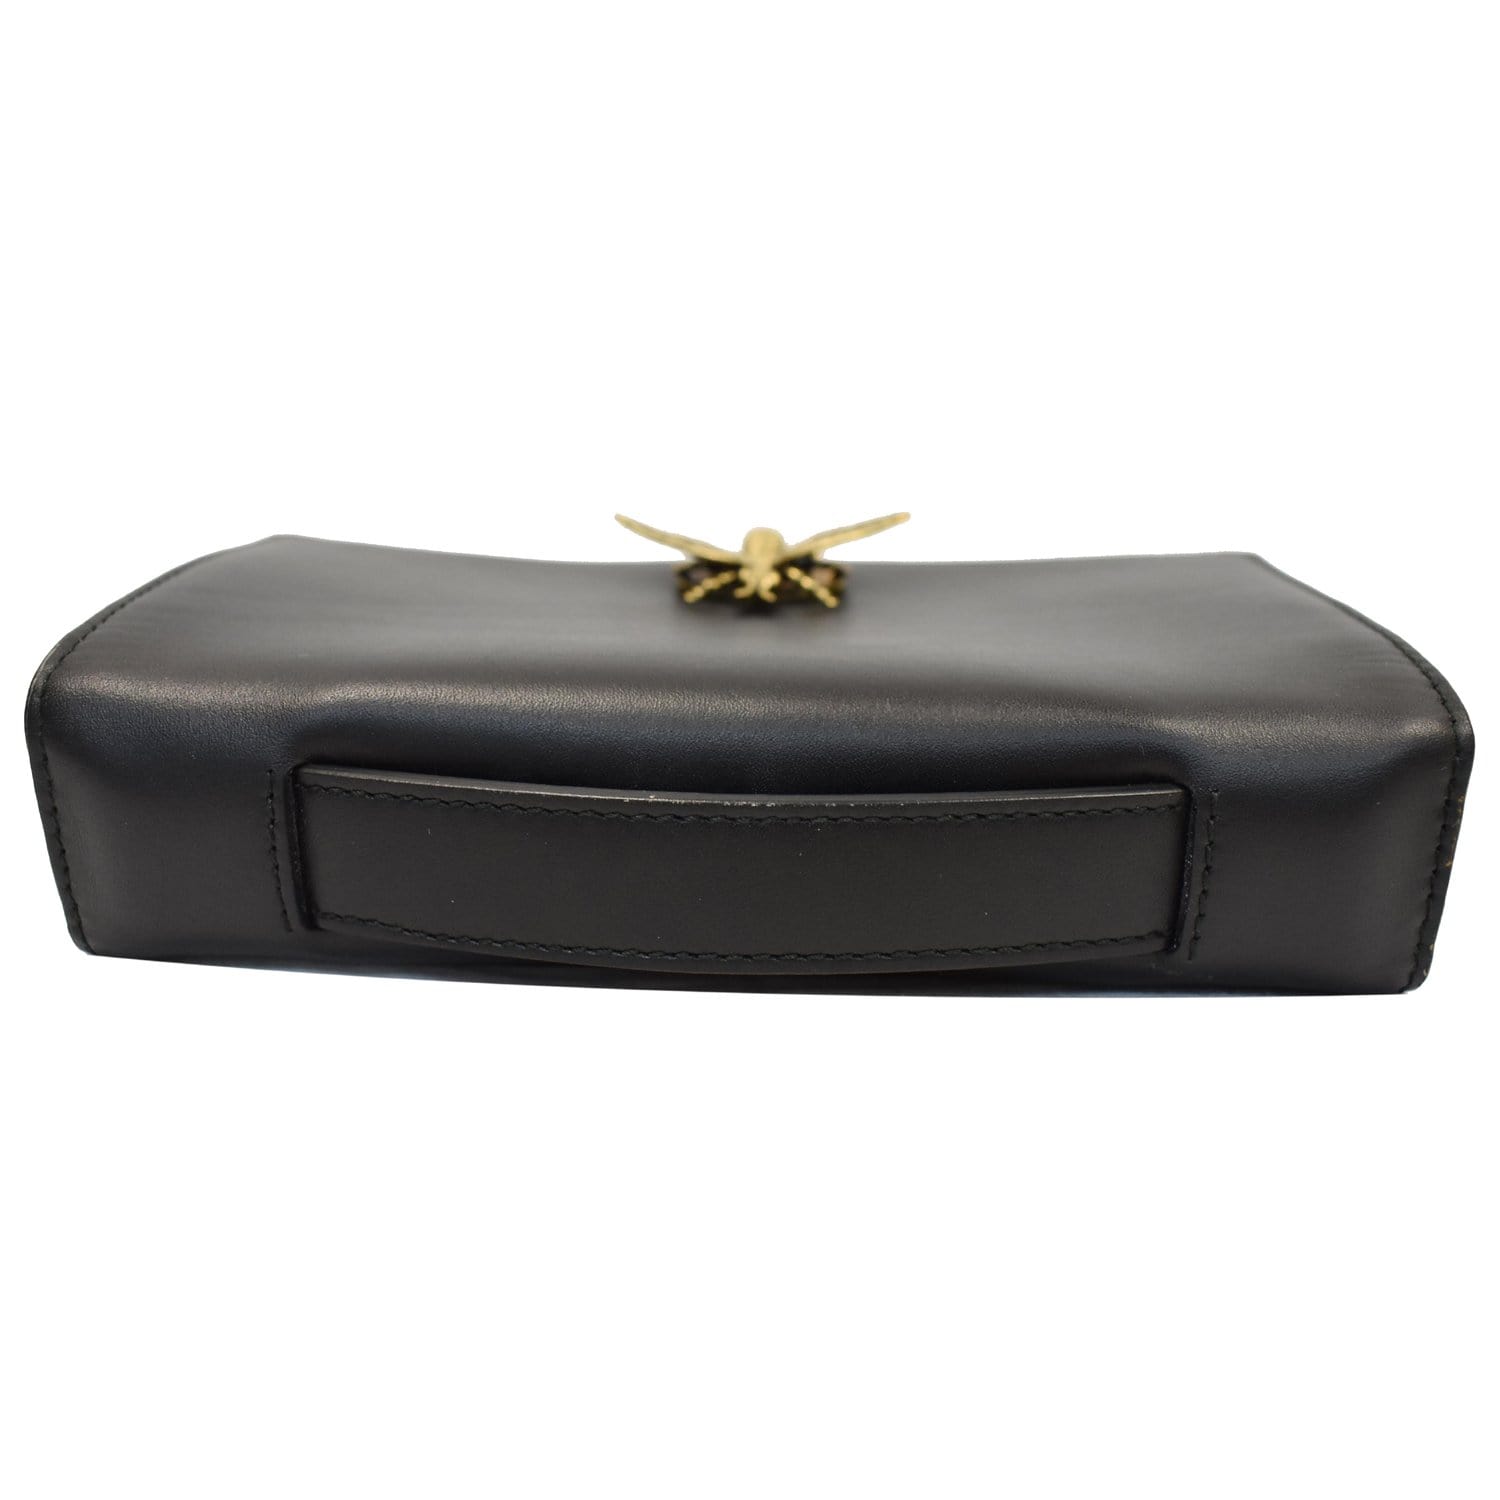 Top Handle Leather Clutch Bag